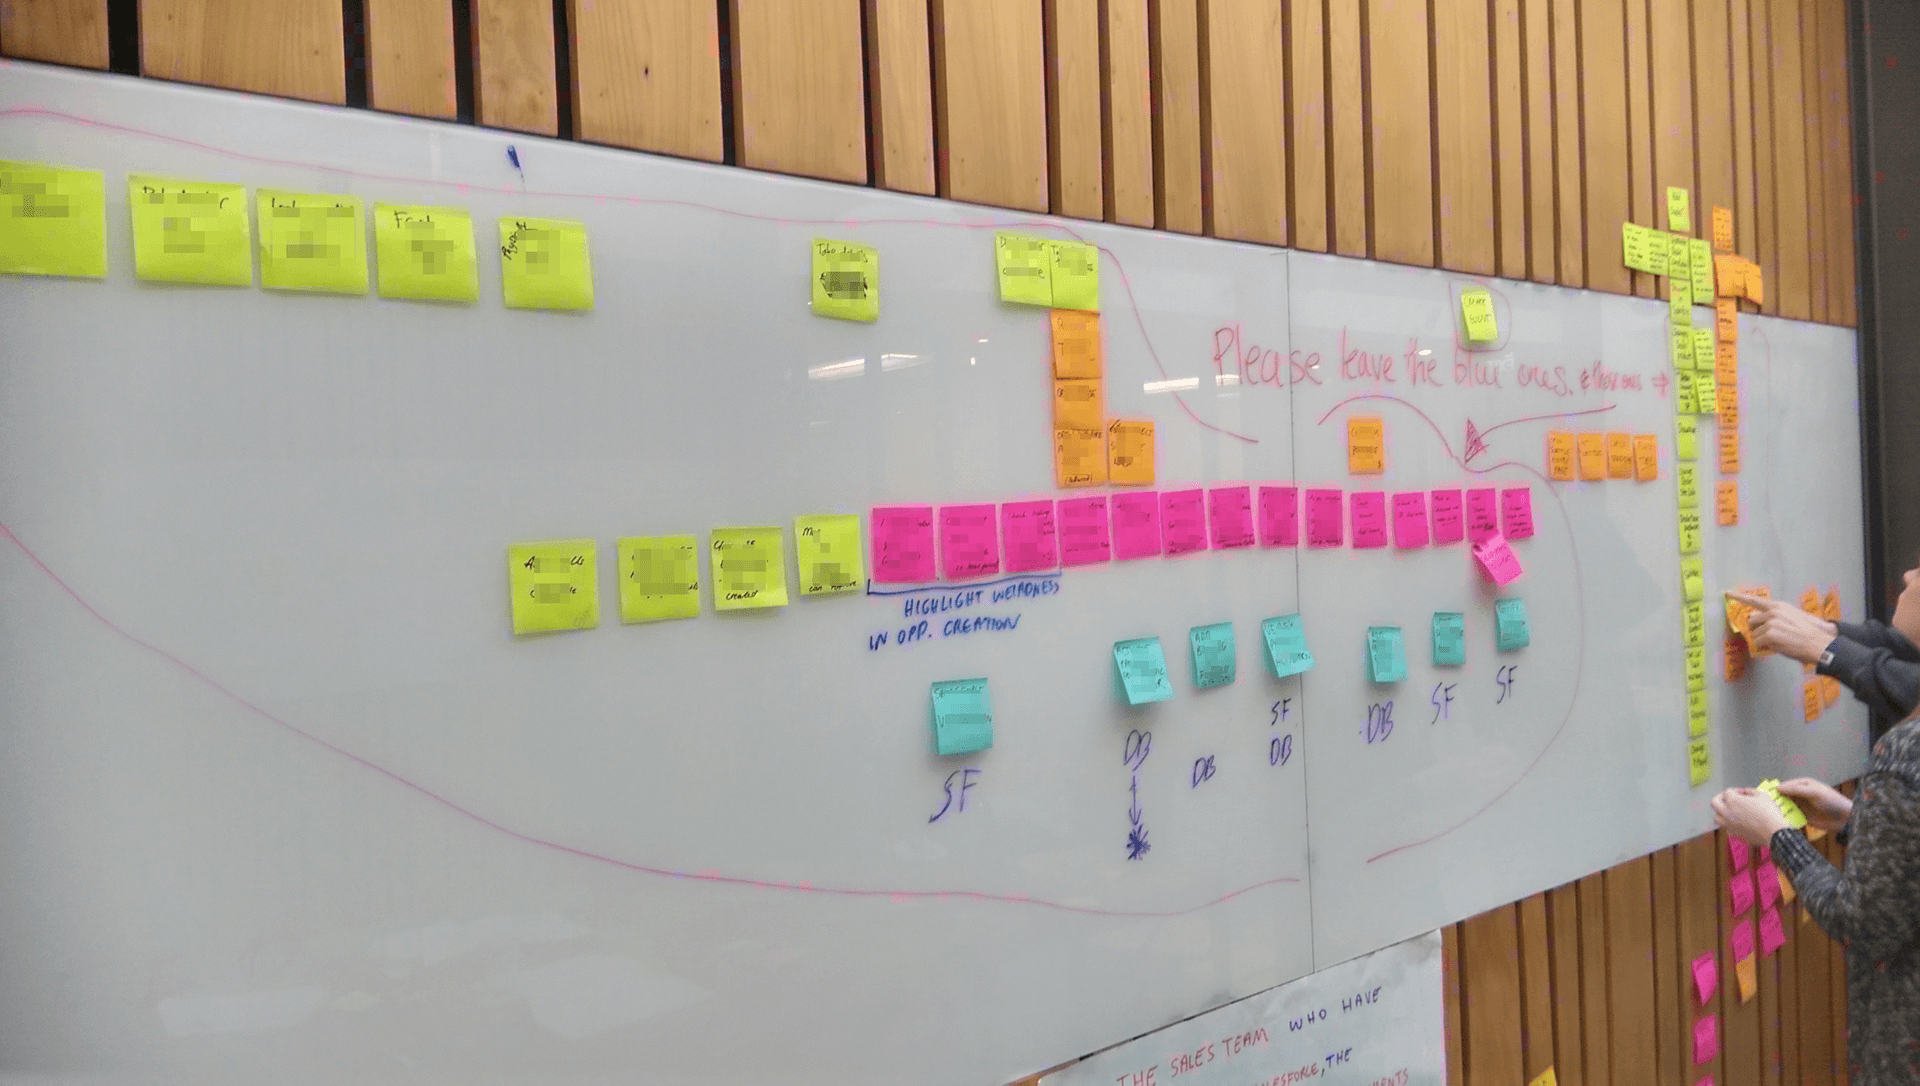 An image of whiteboard activity from a workshop